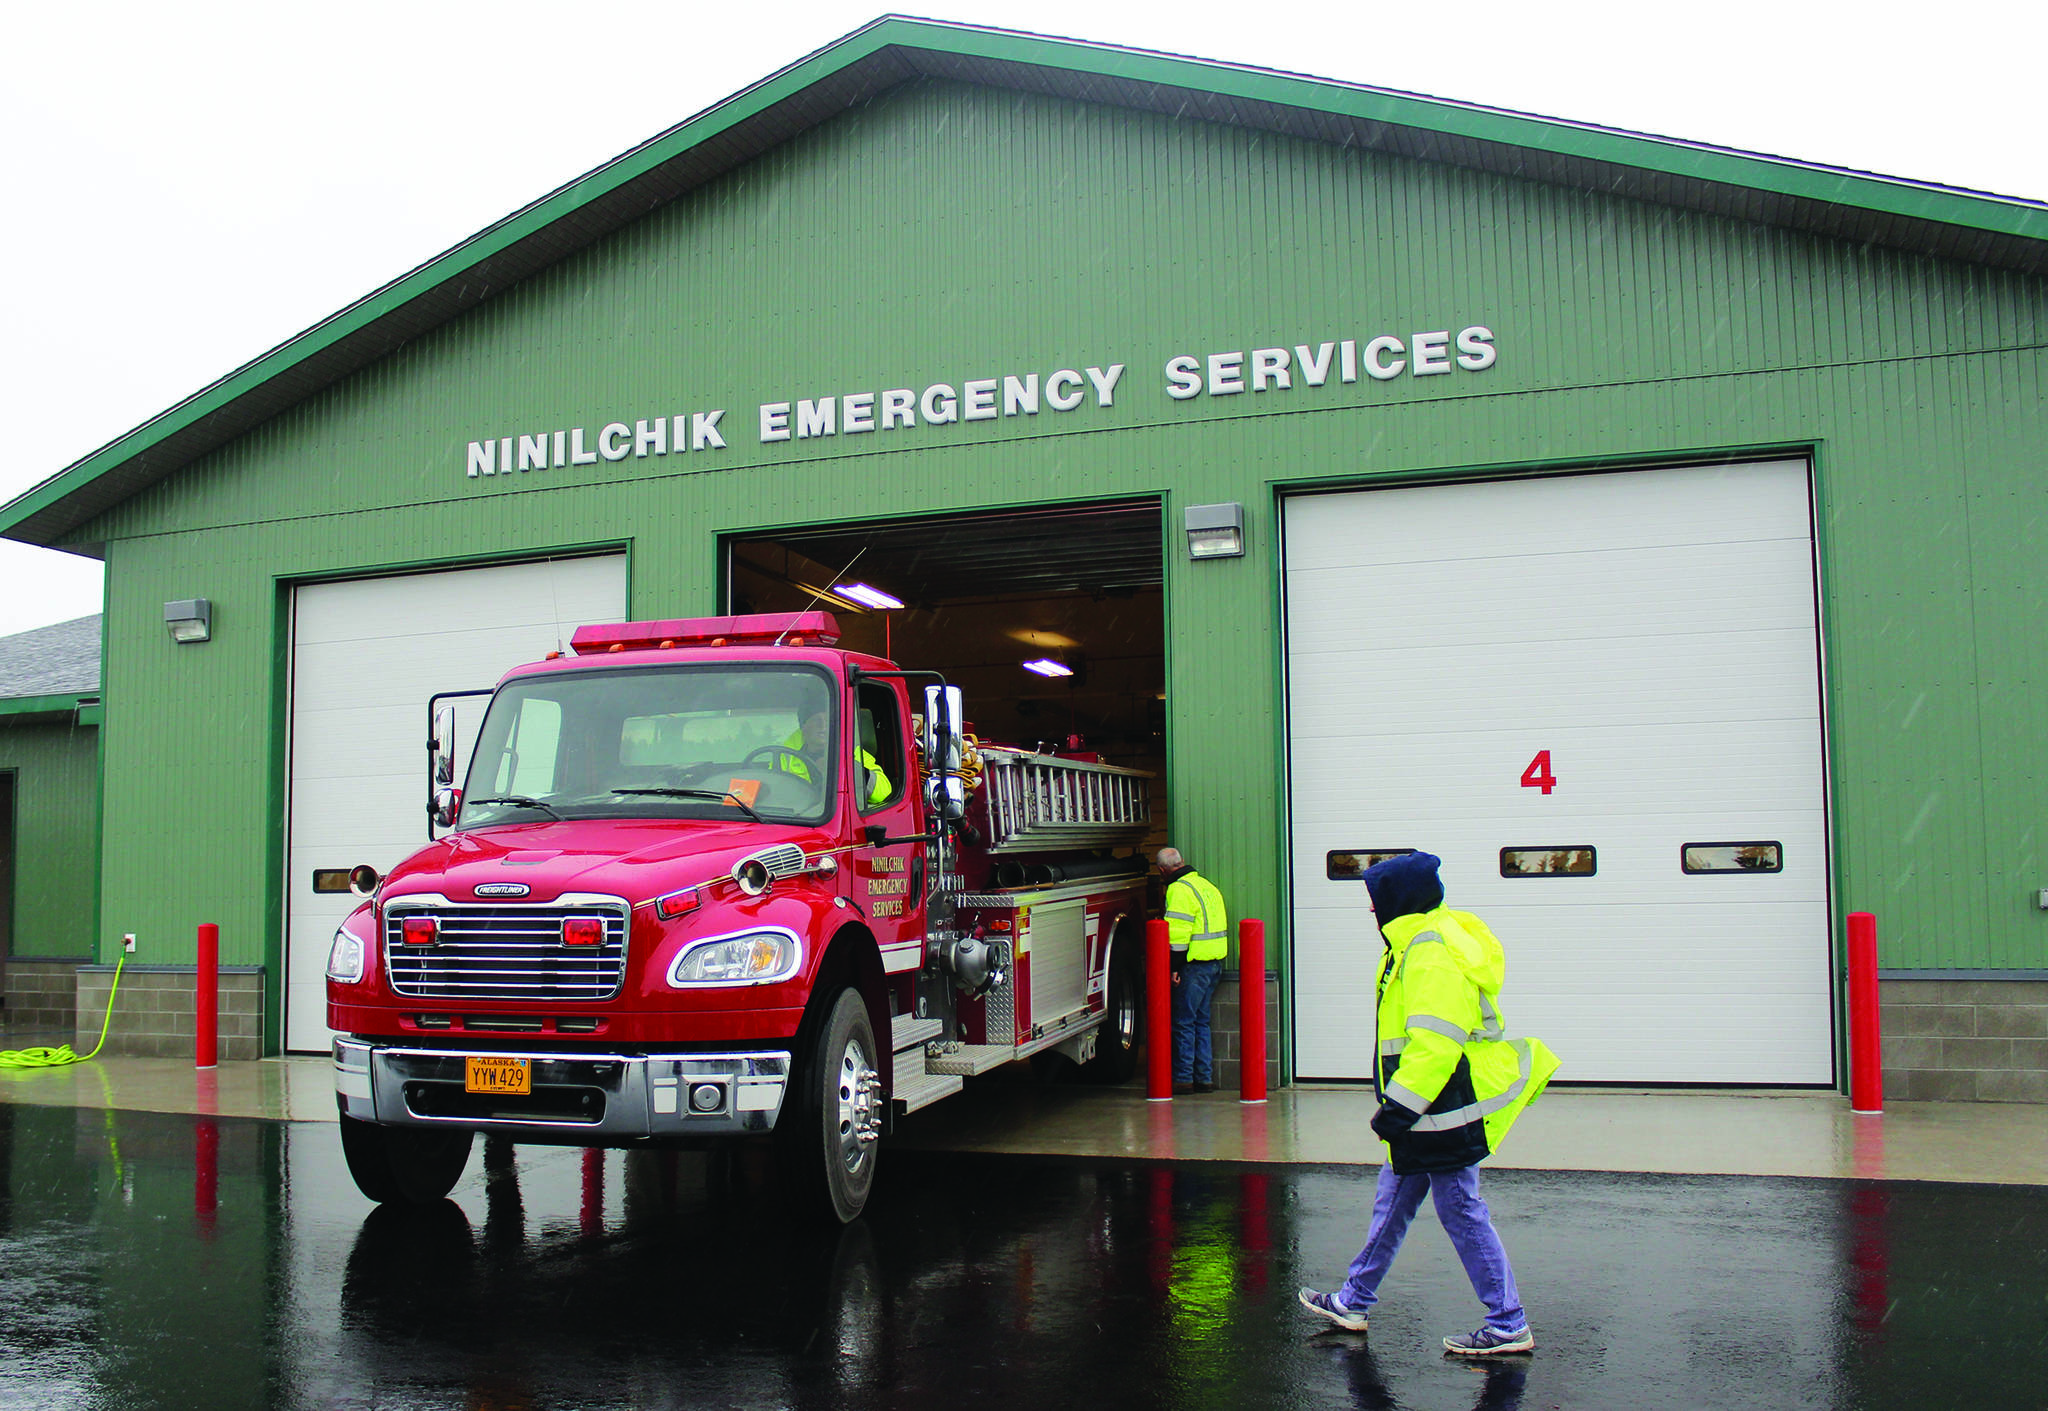 Ninilchik Fire Chief David Bear moves the fire truck out of the new Ninilchik Emergency Services building on Aug. 9, 2014, to make room for visitors to the open house of the new NES building. (Homer News file photo)                                Ninilchik Fire Chief David Bear moves the fire truck out of the new Ninilchik Emergency Services building on Aug. 9, 2014, to make room for visitors to the open house of the new NES building. (Homer News file photo)